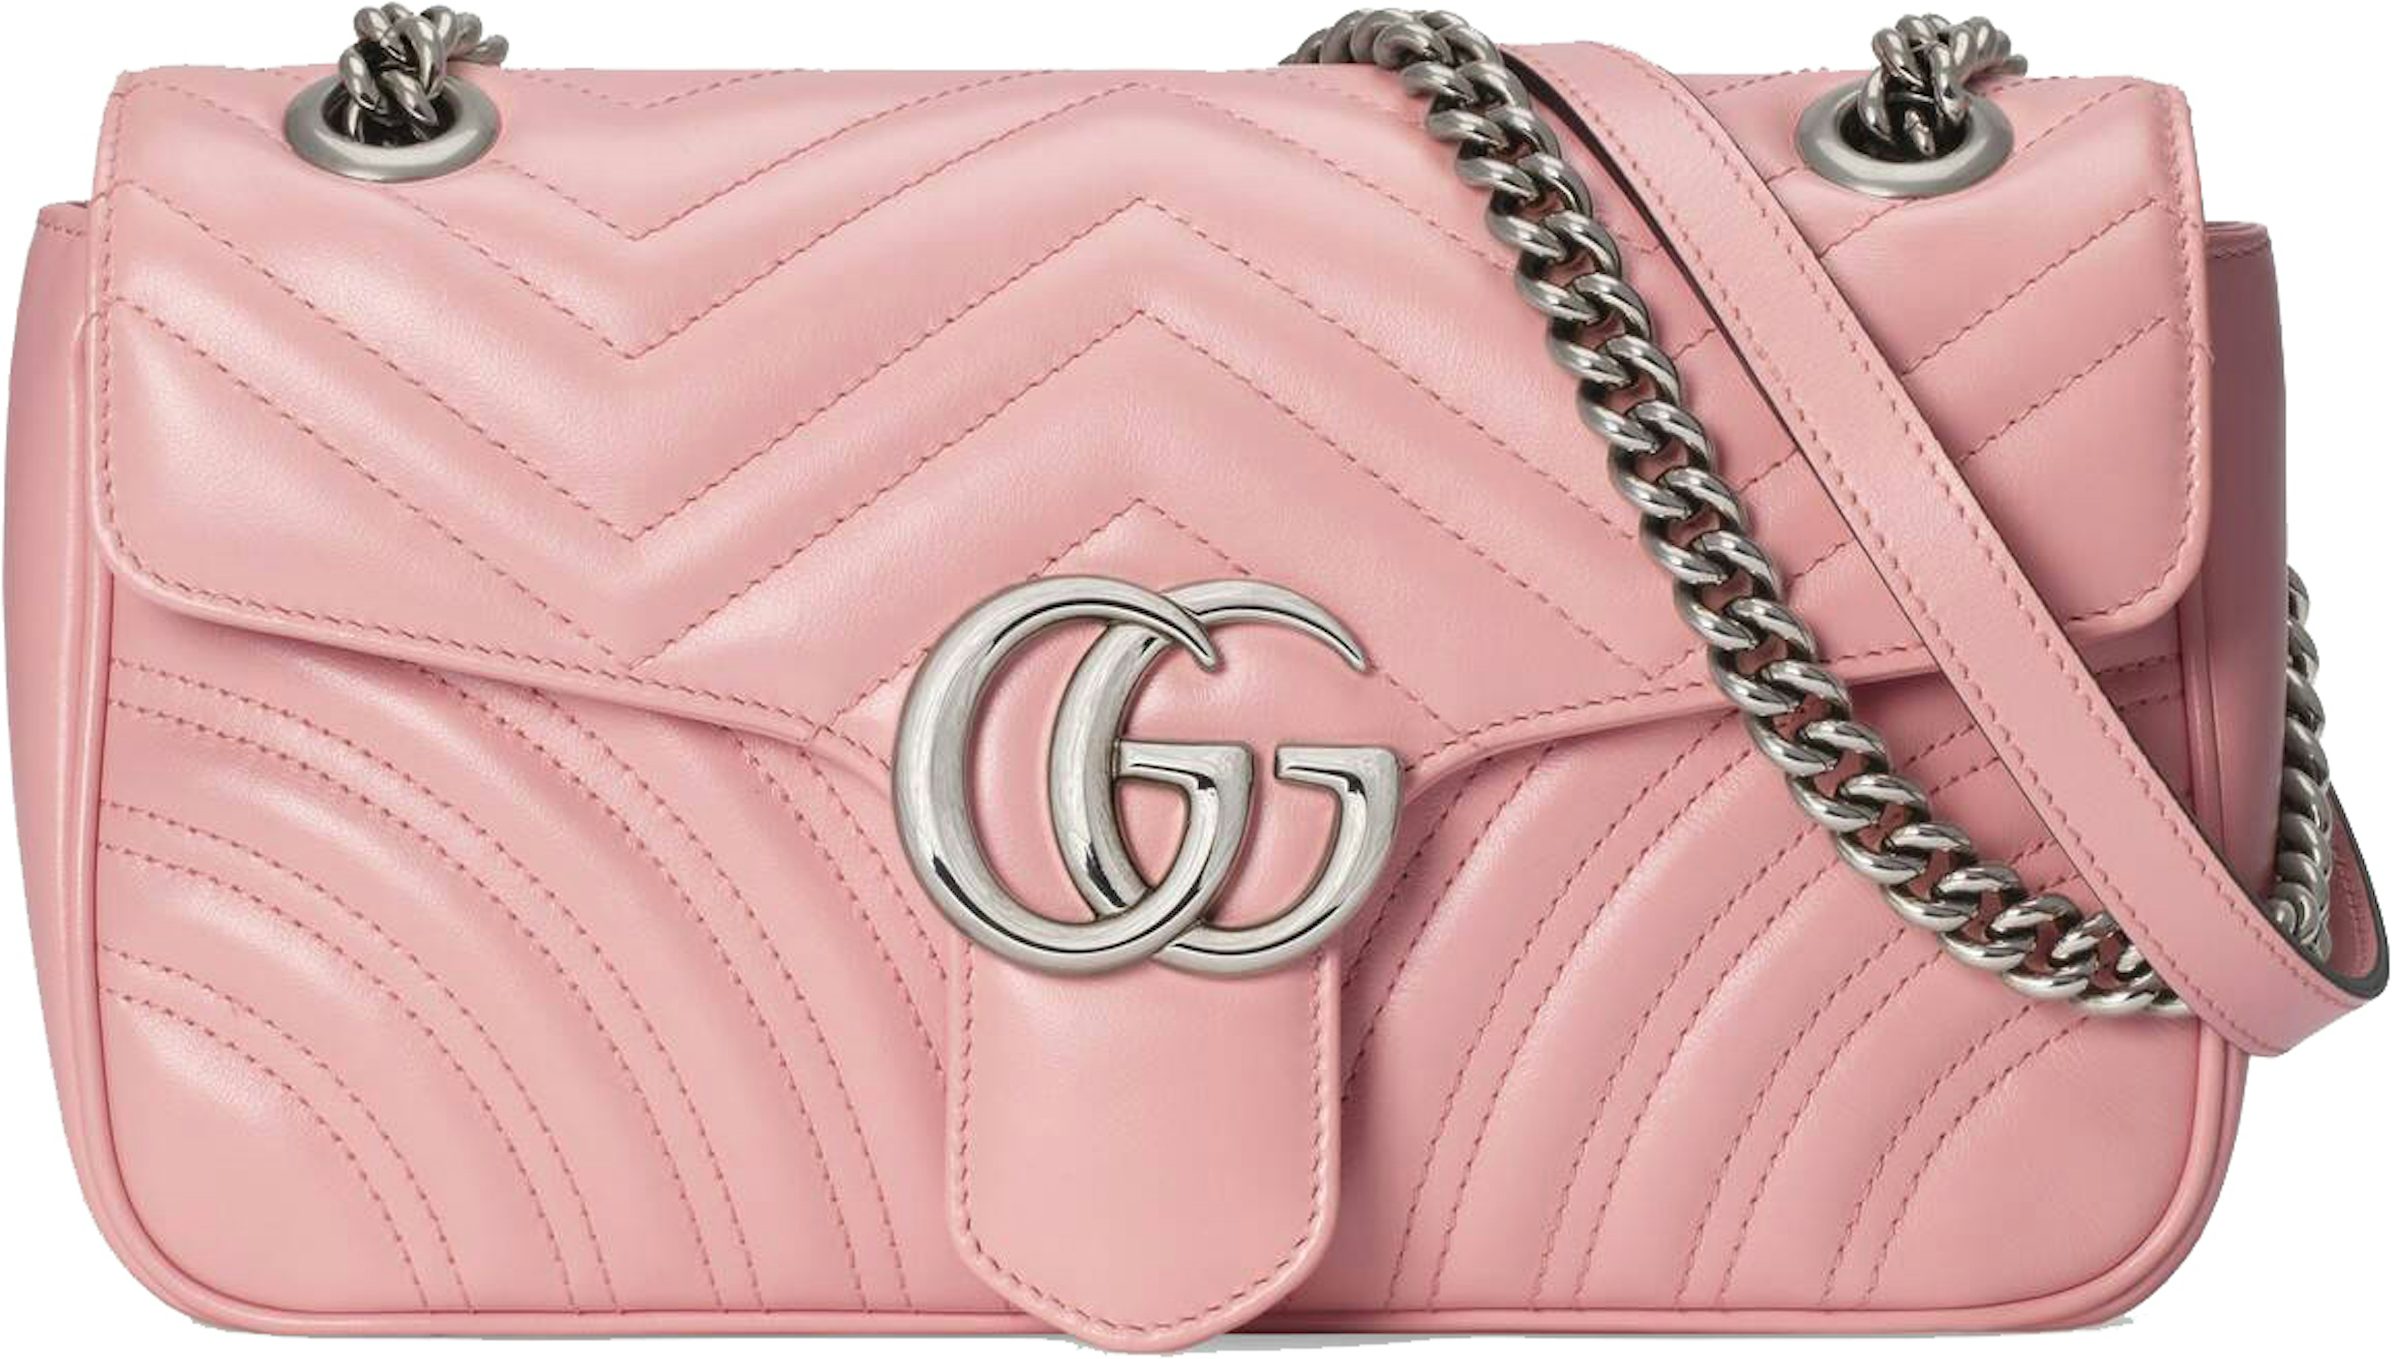 GG Marmont Small Shearling Shoulder Bag in Pink - Gucci